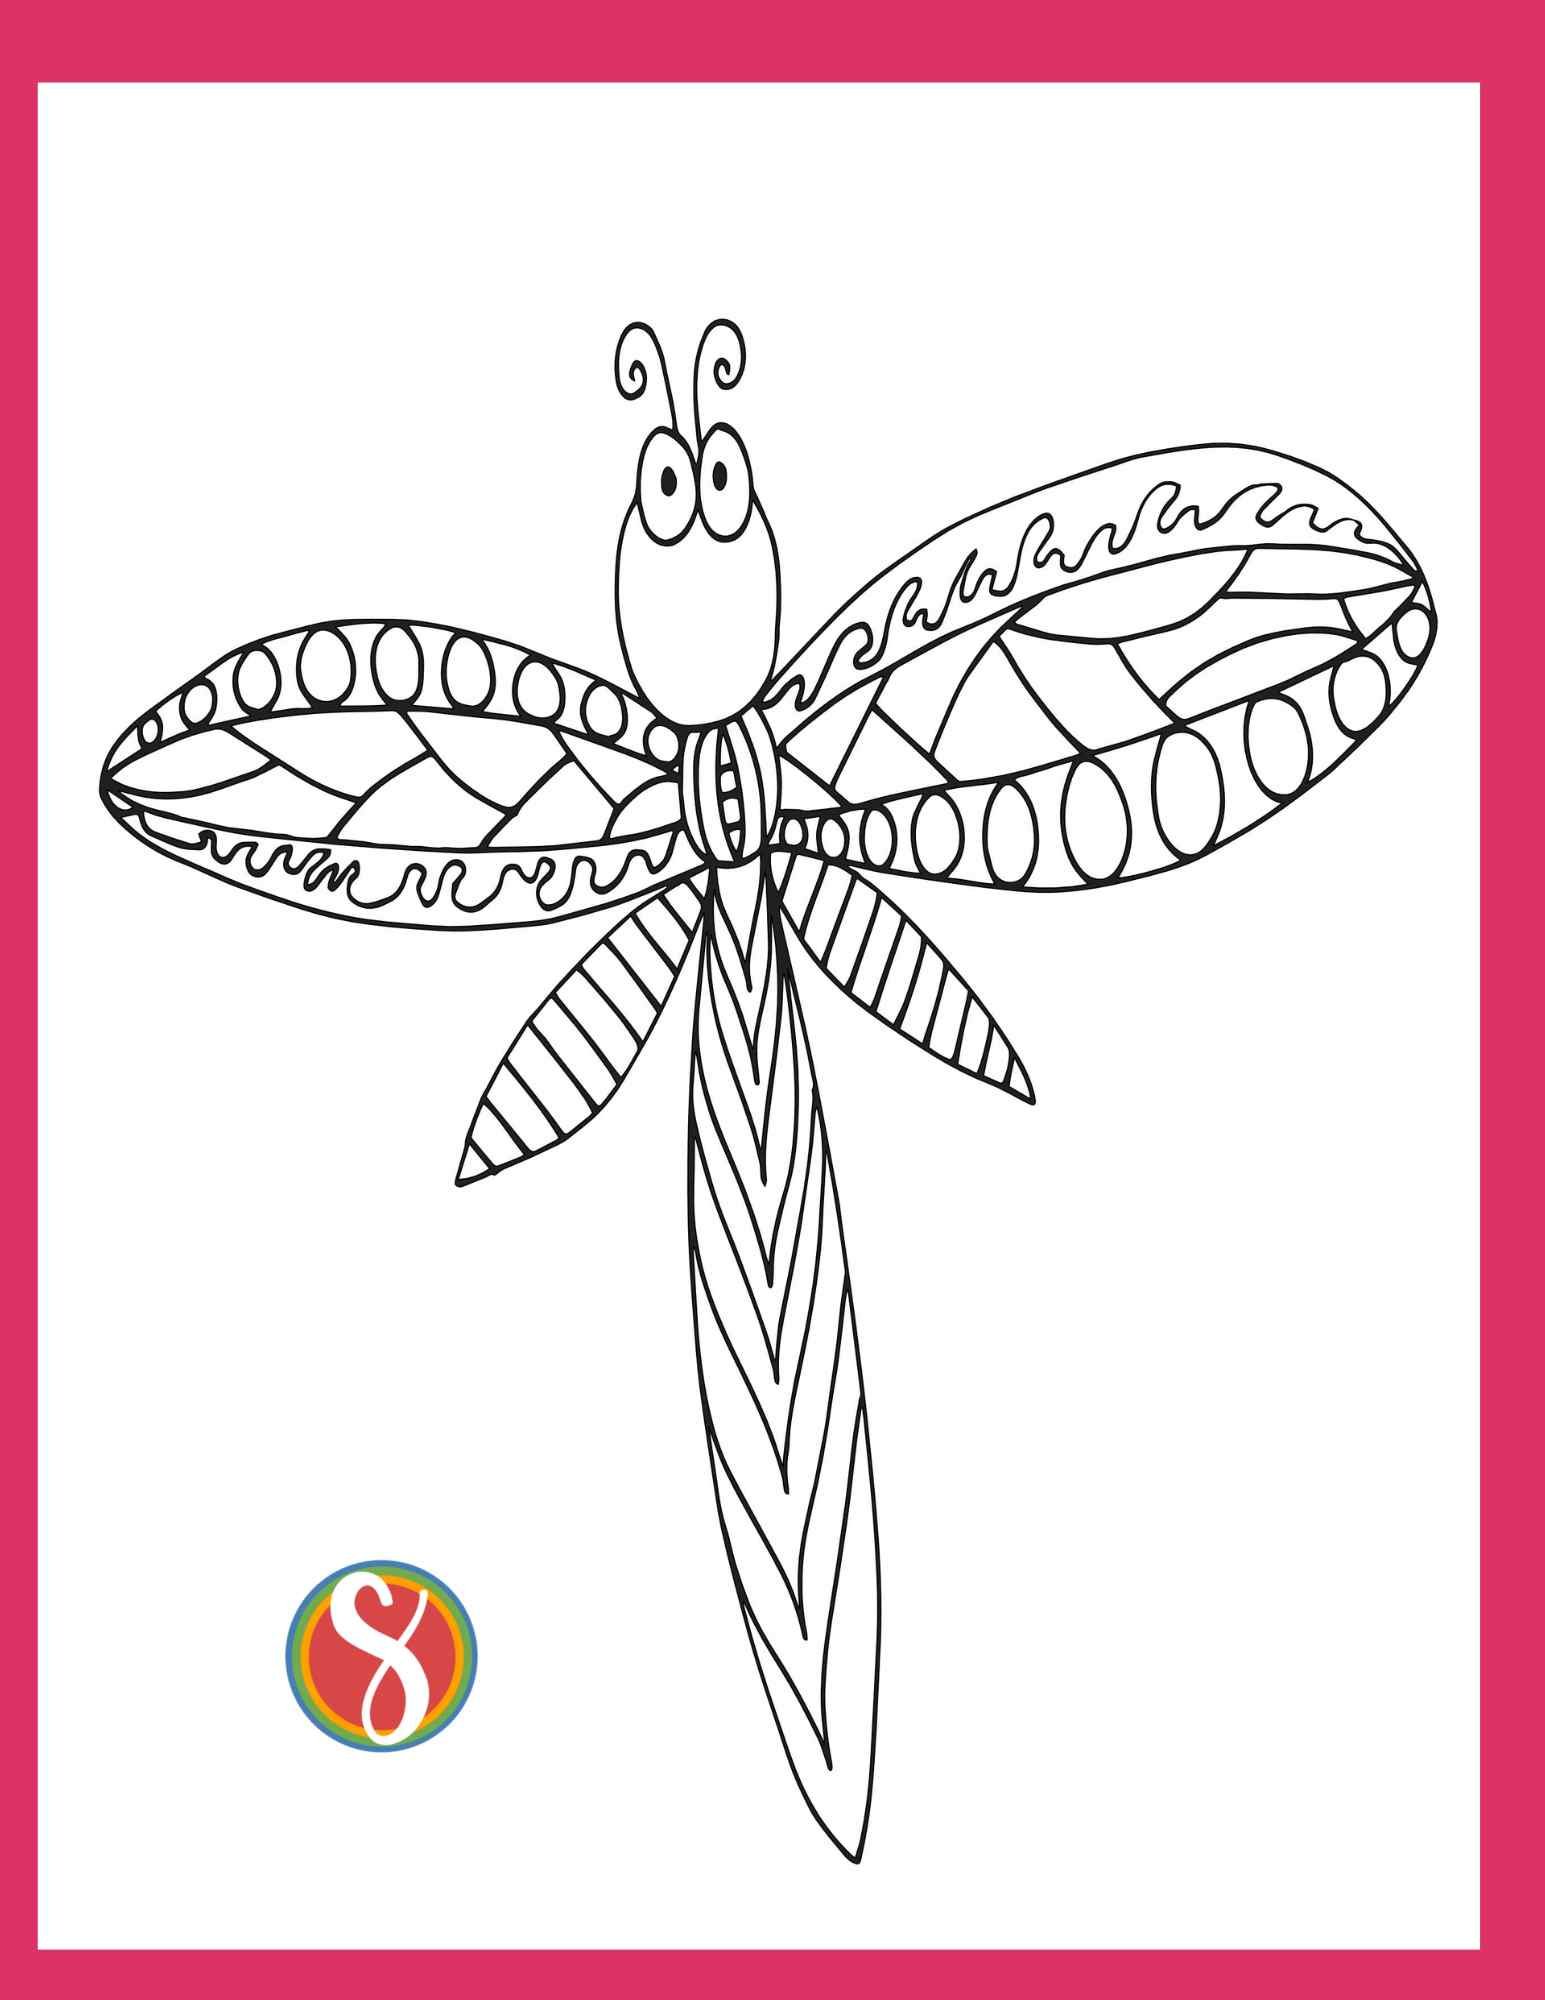 one dragonfly coloring page with bug eyes and line art to color inside the dragonfly body